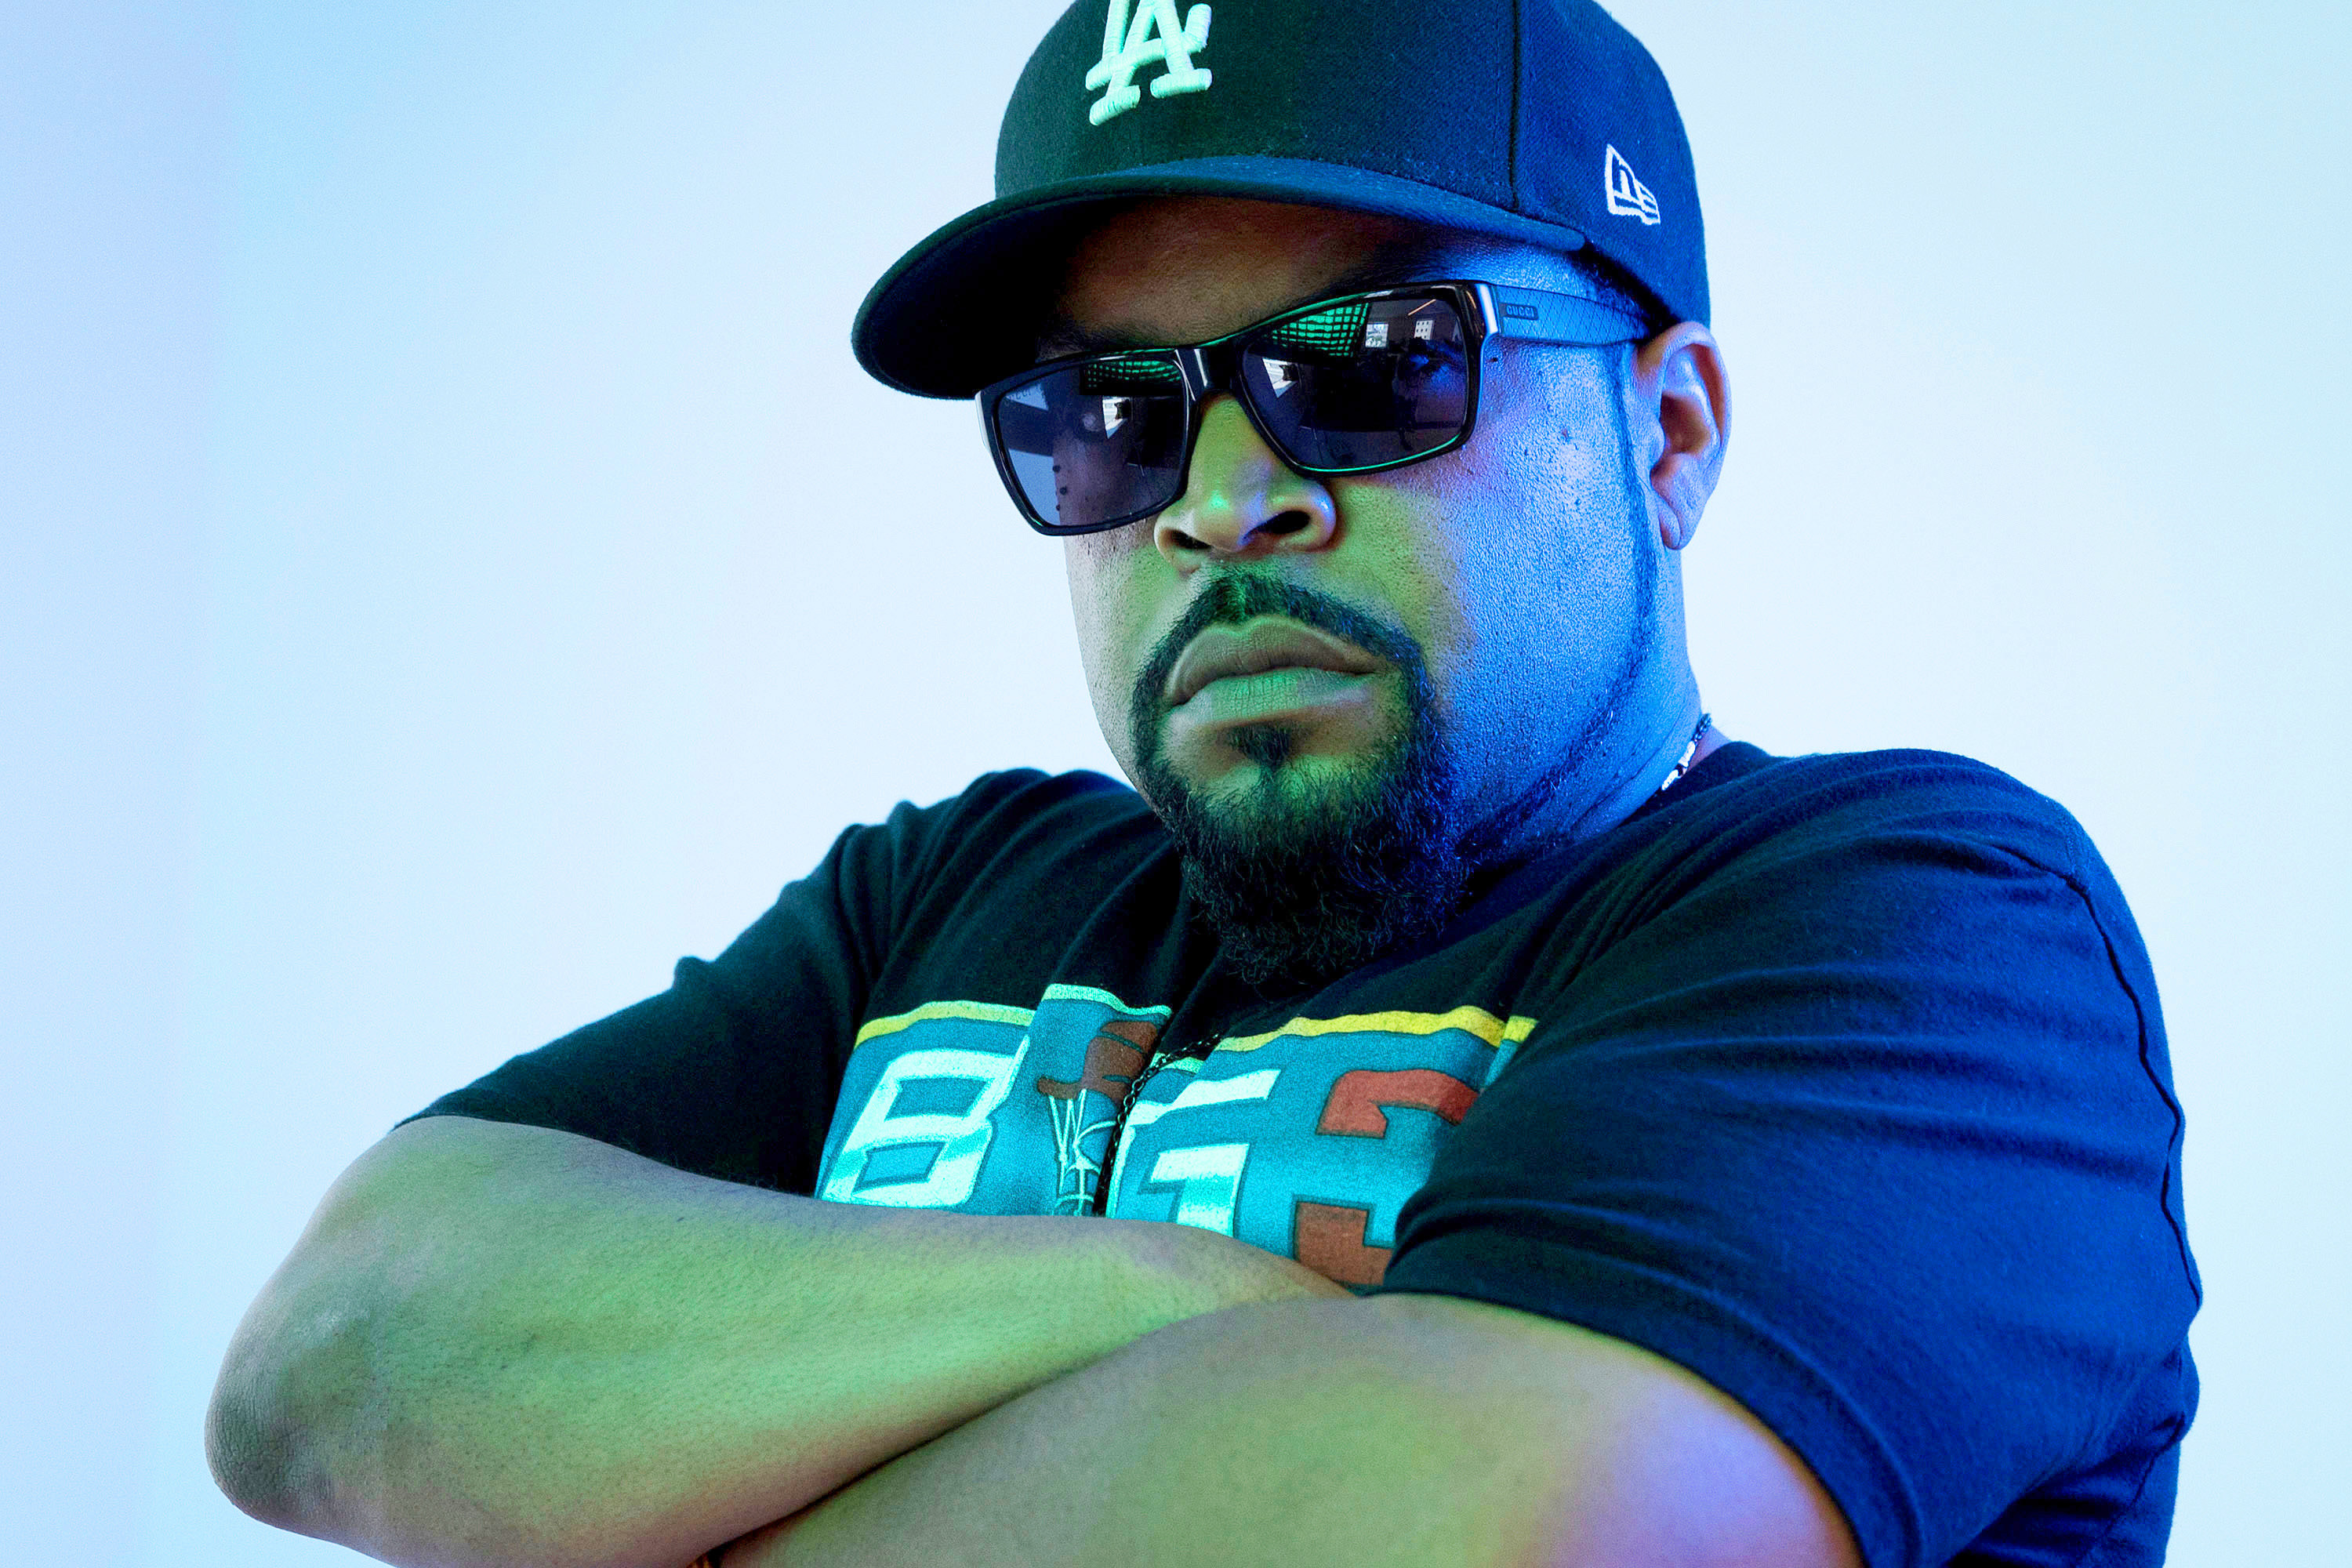 Ice Cube rapper, Candid interview, NWA's history, Rolling Stone article, 3000x2000 HD Desktop